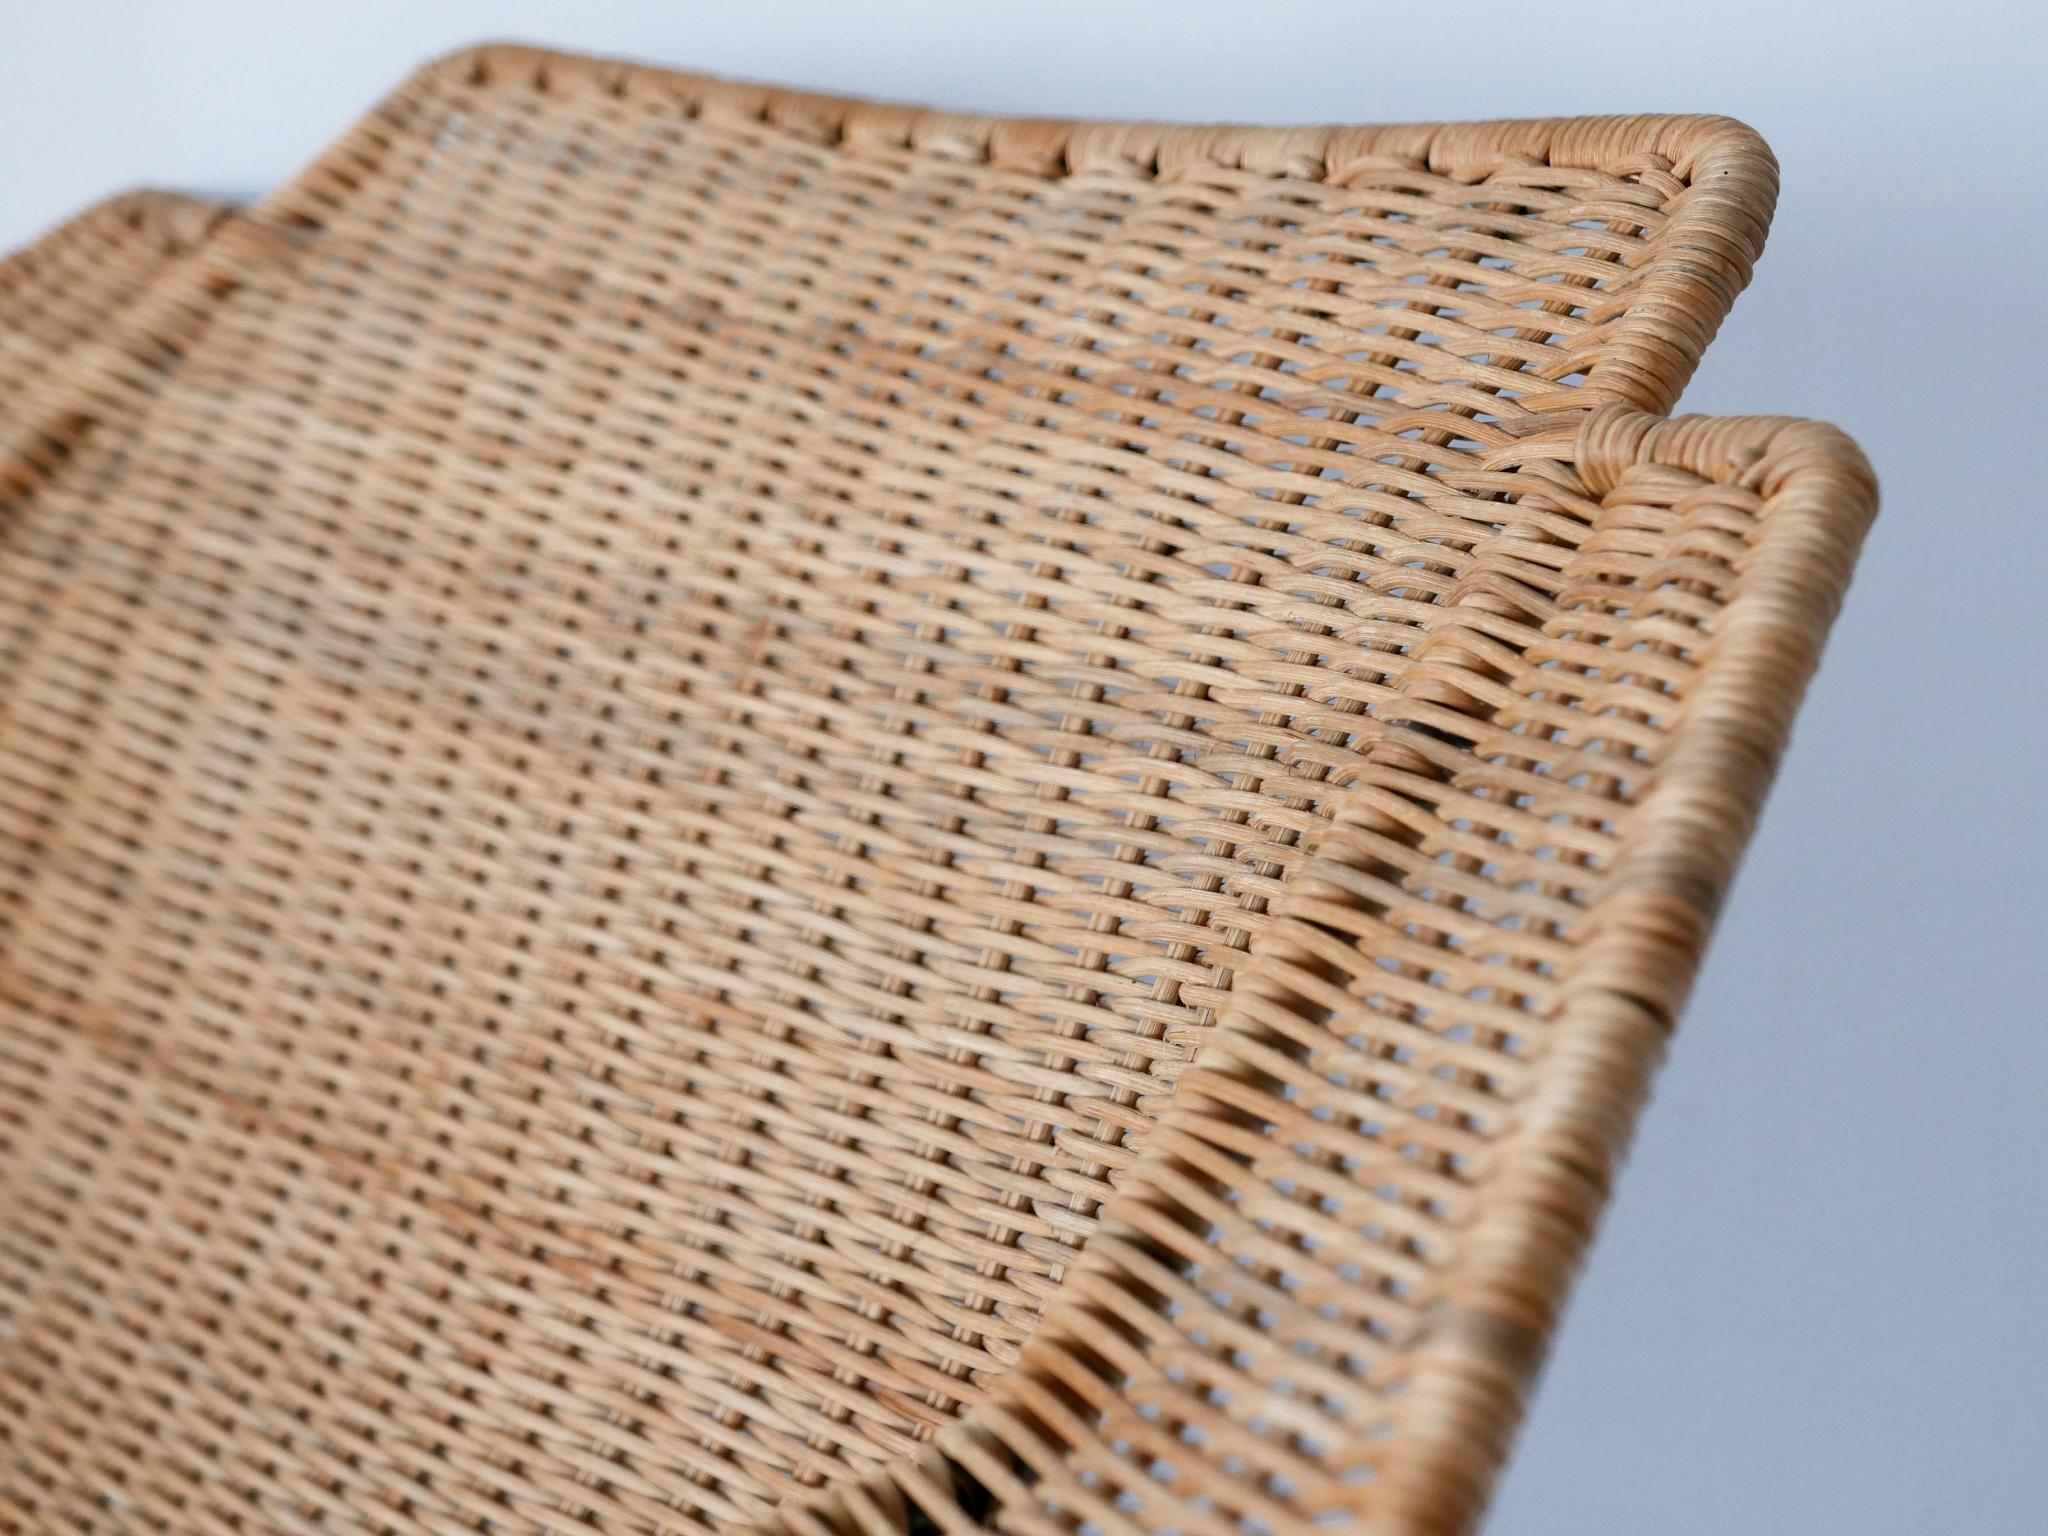 Exceptional Mid-Century Modern Wicker Lounge Chair or Armchair 1950s Sweden For Sale 10